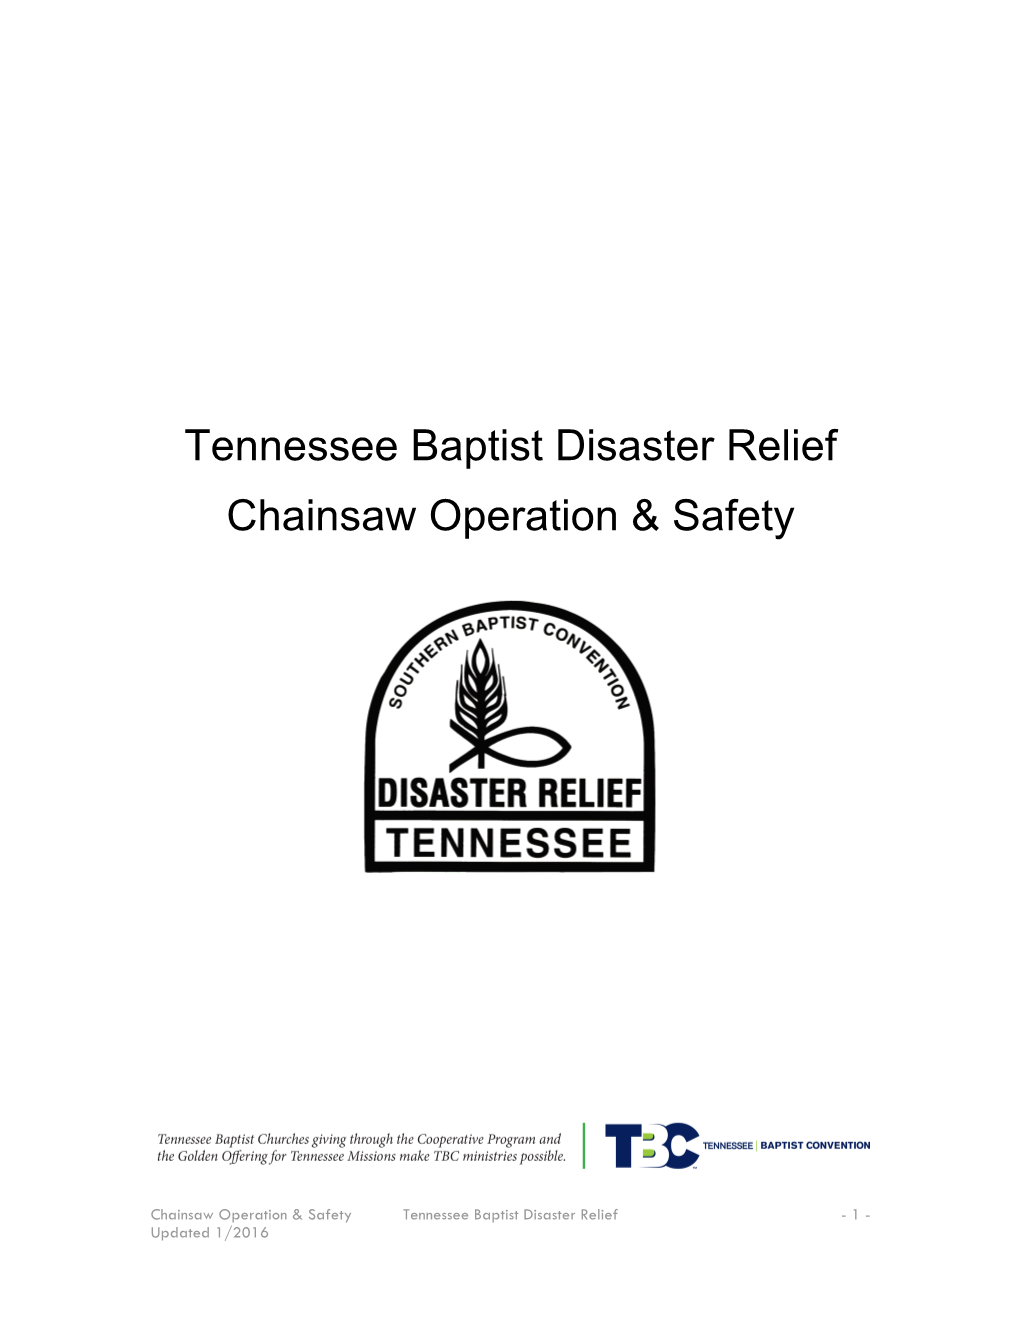 Tennessee Baptist Disaster Relief Chainsaw Operation & Safety